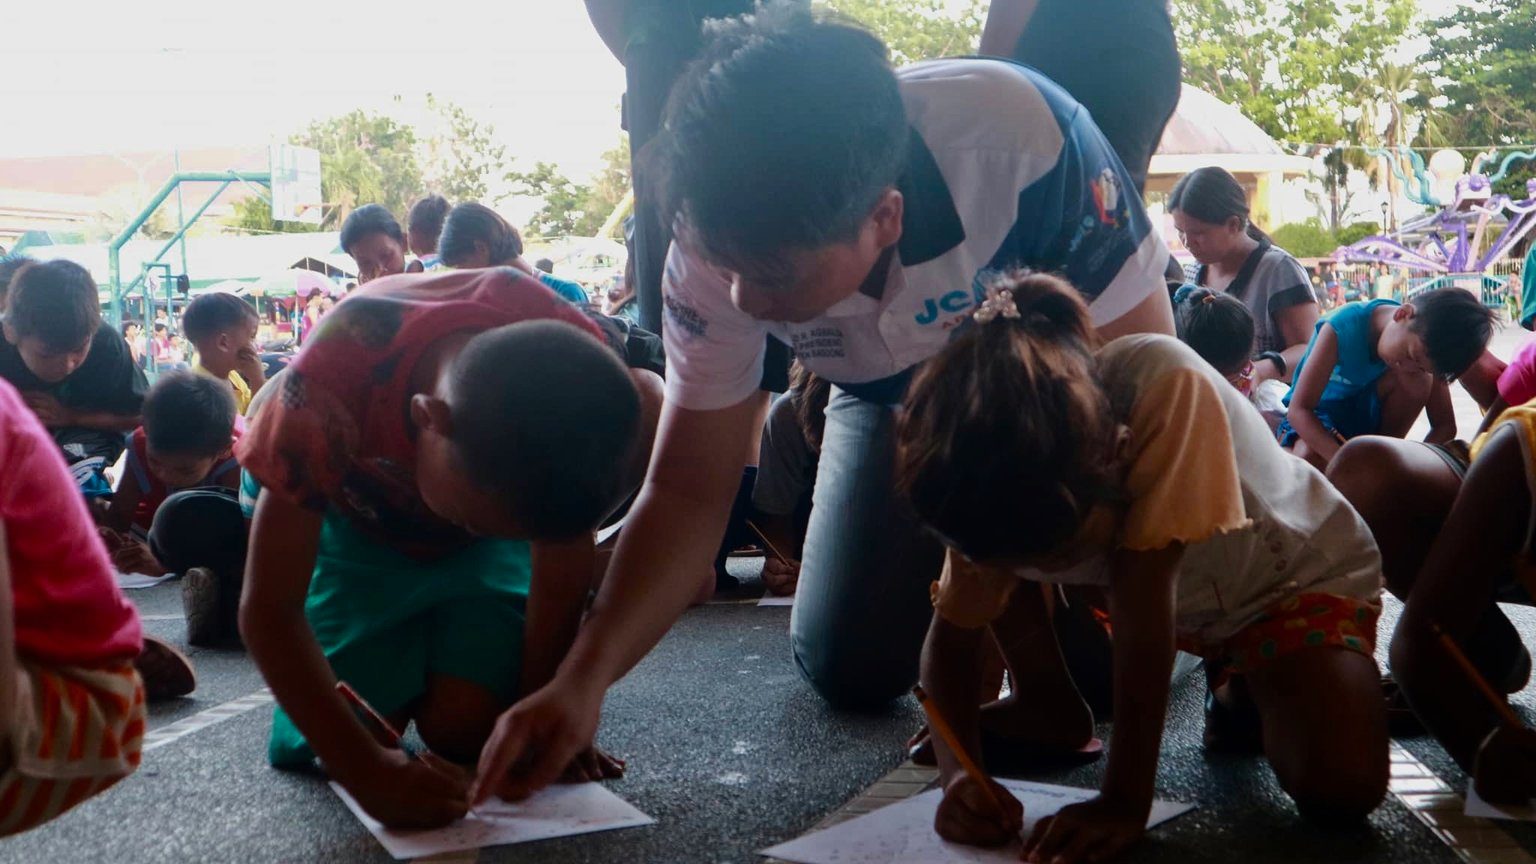 MORE THAN GIFTS. A volunteer in Lingayen, Pangasinan assists kids in writing during an outreach event at the plaza. Photo courtesy of Jerico Samson  